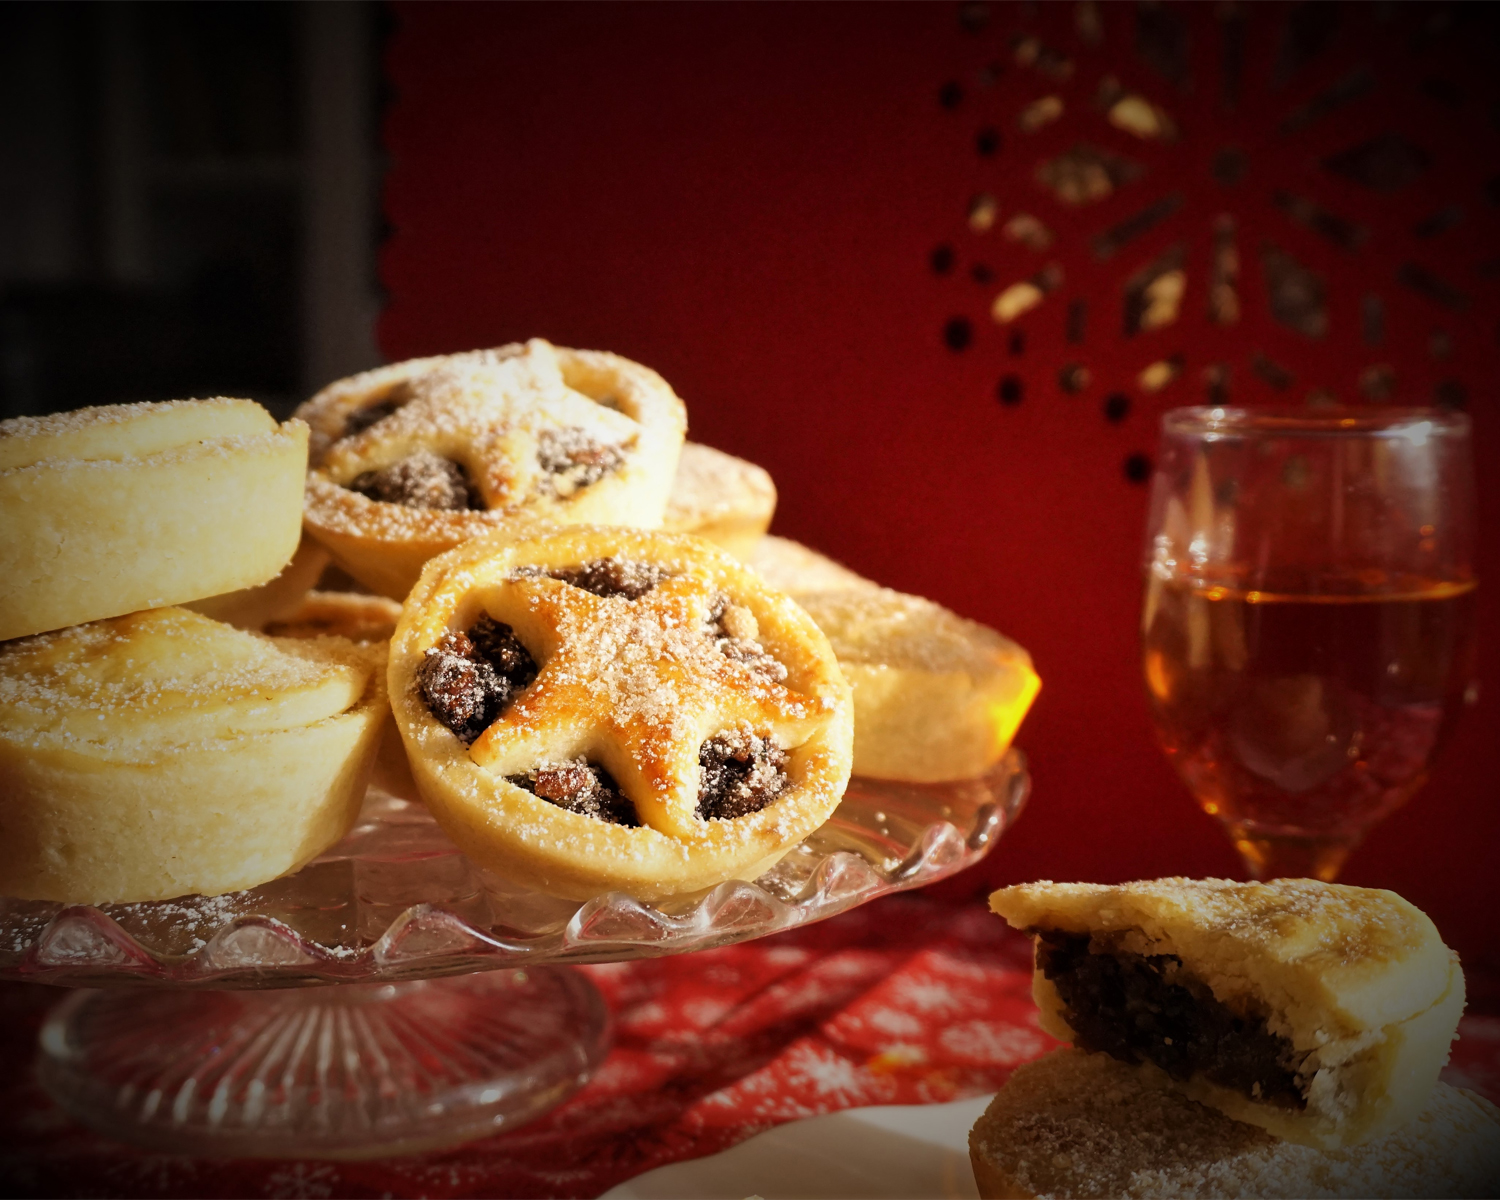 mince pies made with sweet shortcrust pastry